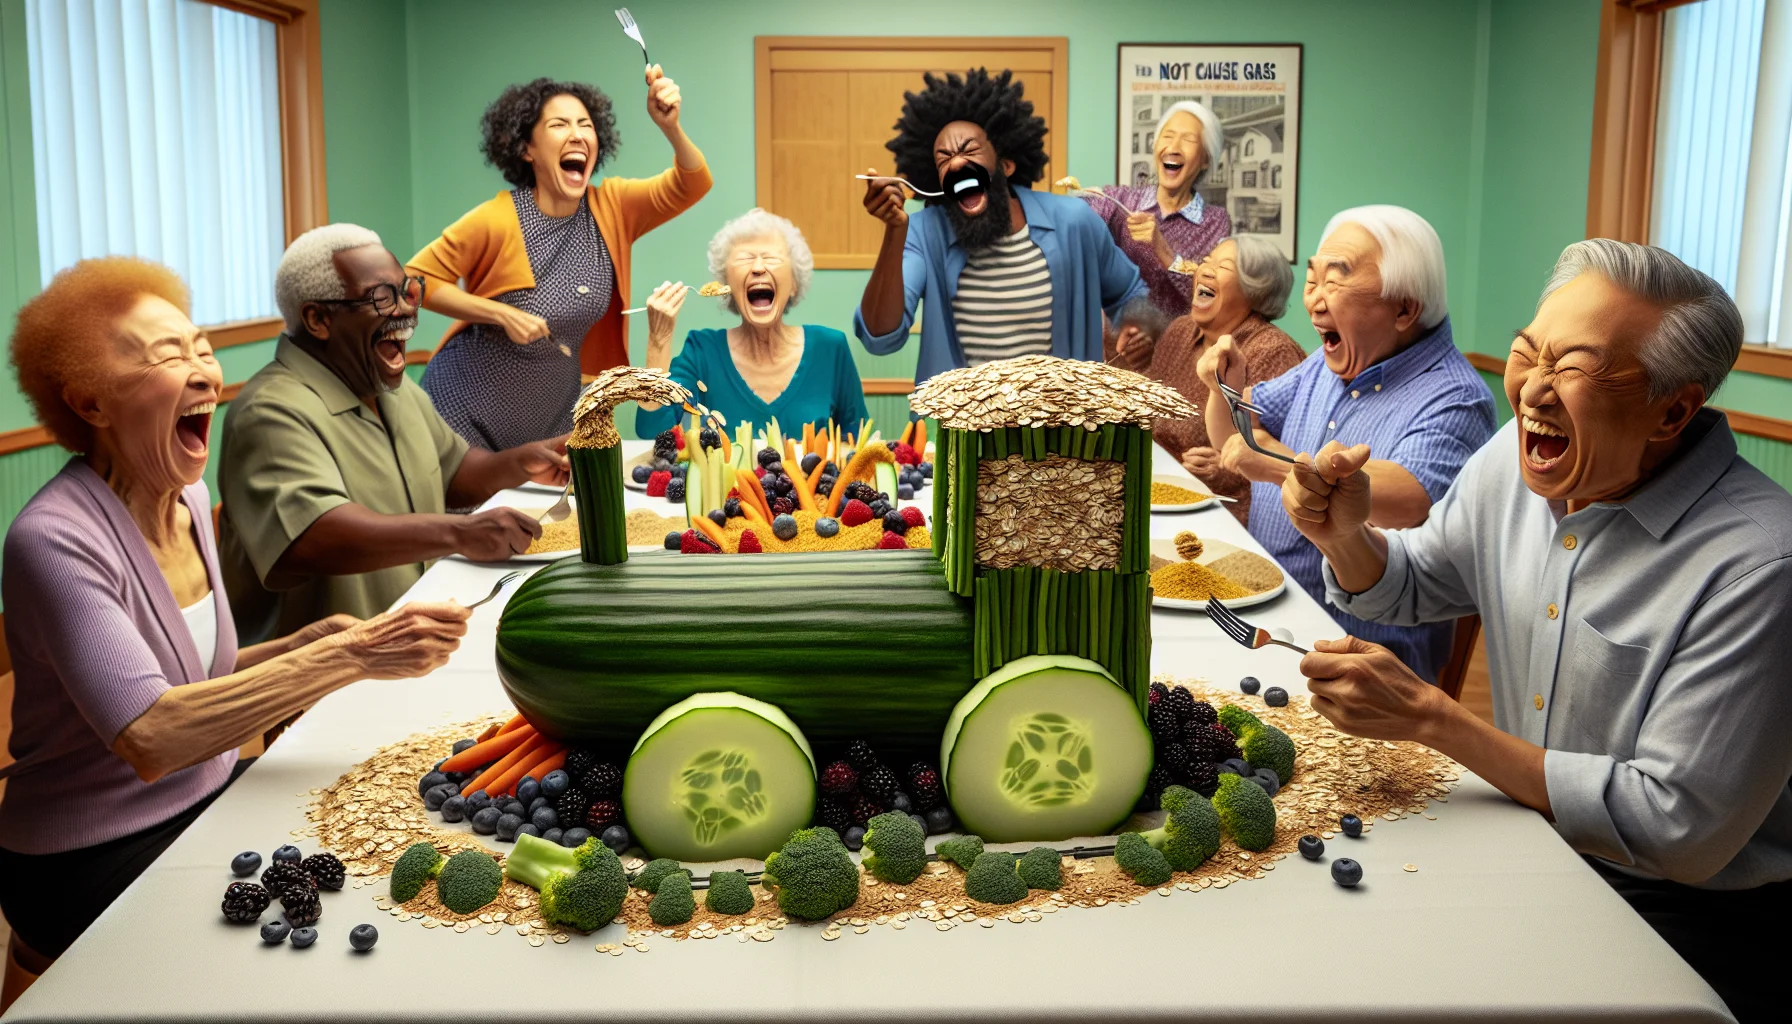 A humorous scene set in a lively senior citizens' center. The focus is a table filled with high fiber foods that do not cause gas, such as oats, berries, quinoa, and cucumber, artistically arranged in humorous shapes and designs – think a cucumber train loaded with oat 'passengers' or a quinoa 'castle' guarded by tiny broccoli trees. A group of jubilant seniors of diverse backgrounds, two Black females, one Middle-Eastern male, and an Asian male, are gathered around the table, laughing heartily and playfully fighting over the foods with extended fork 'jousts'. The entire scene feels light-hearted and lively, symbolic of the fun aspects of healthy eating.